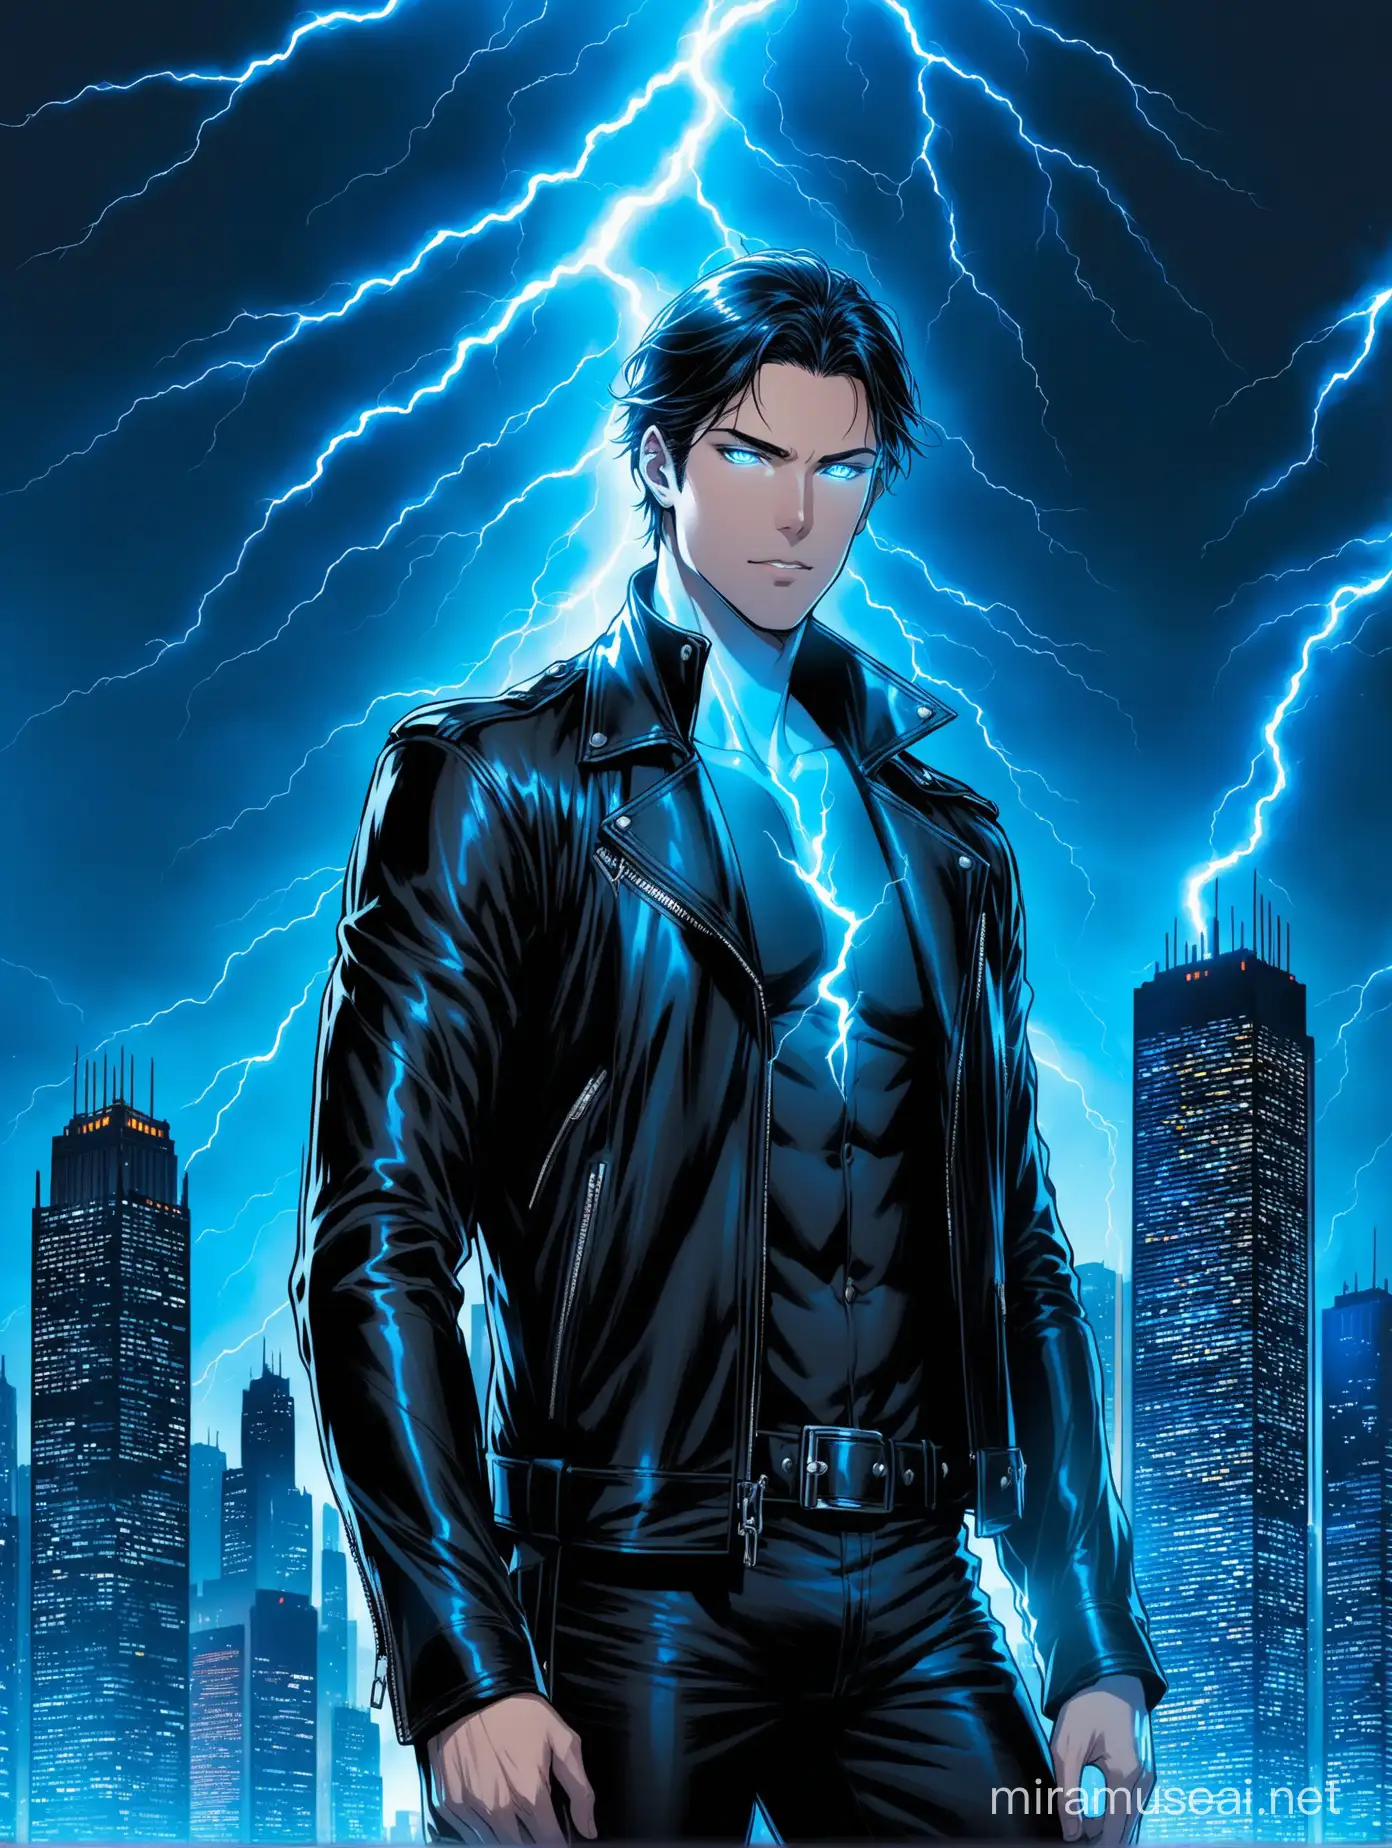 Handsome Young Man in Leather Jacket with Glowing Blue Eyes and Lightning